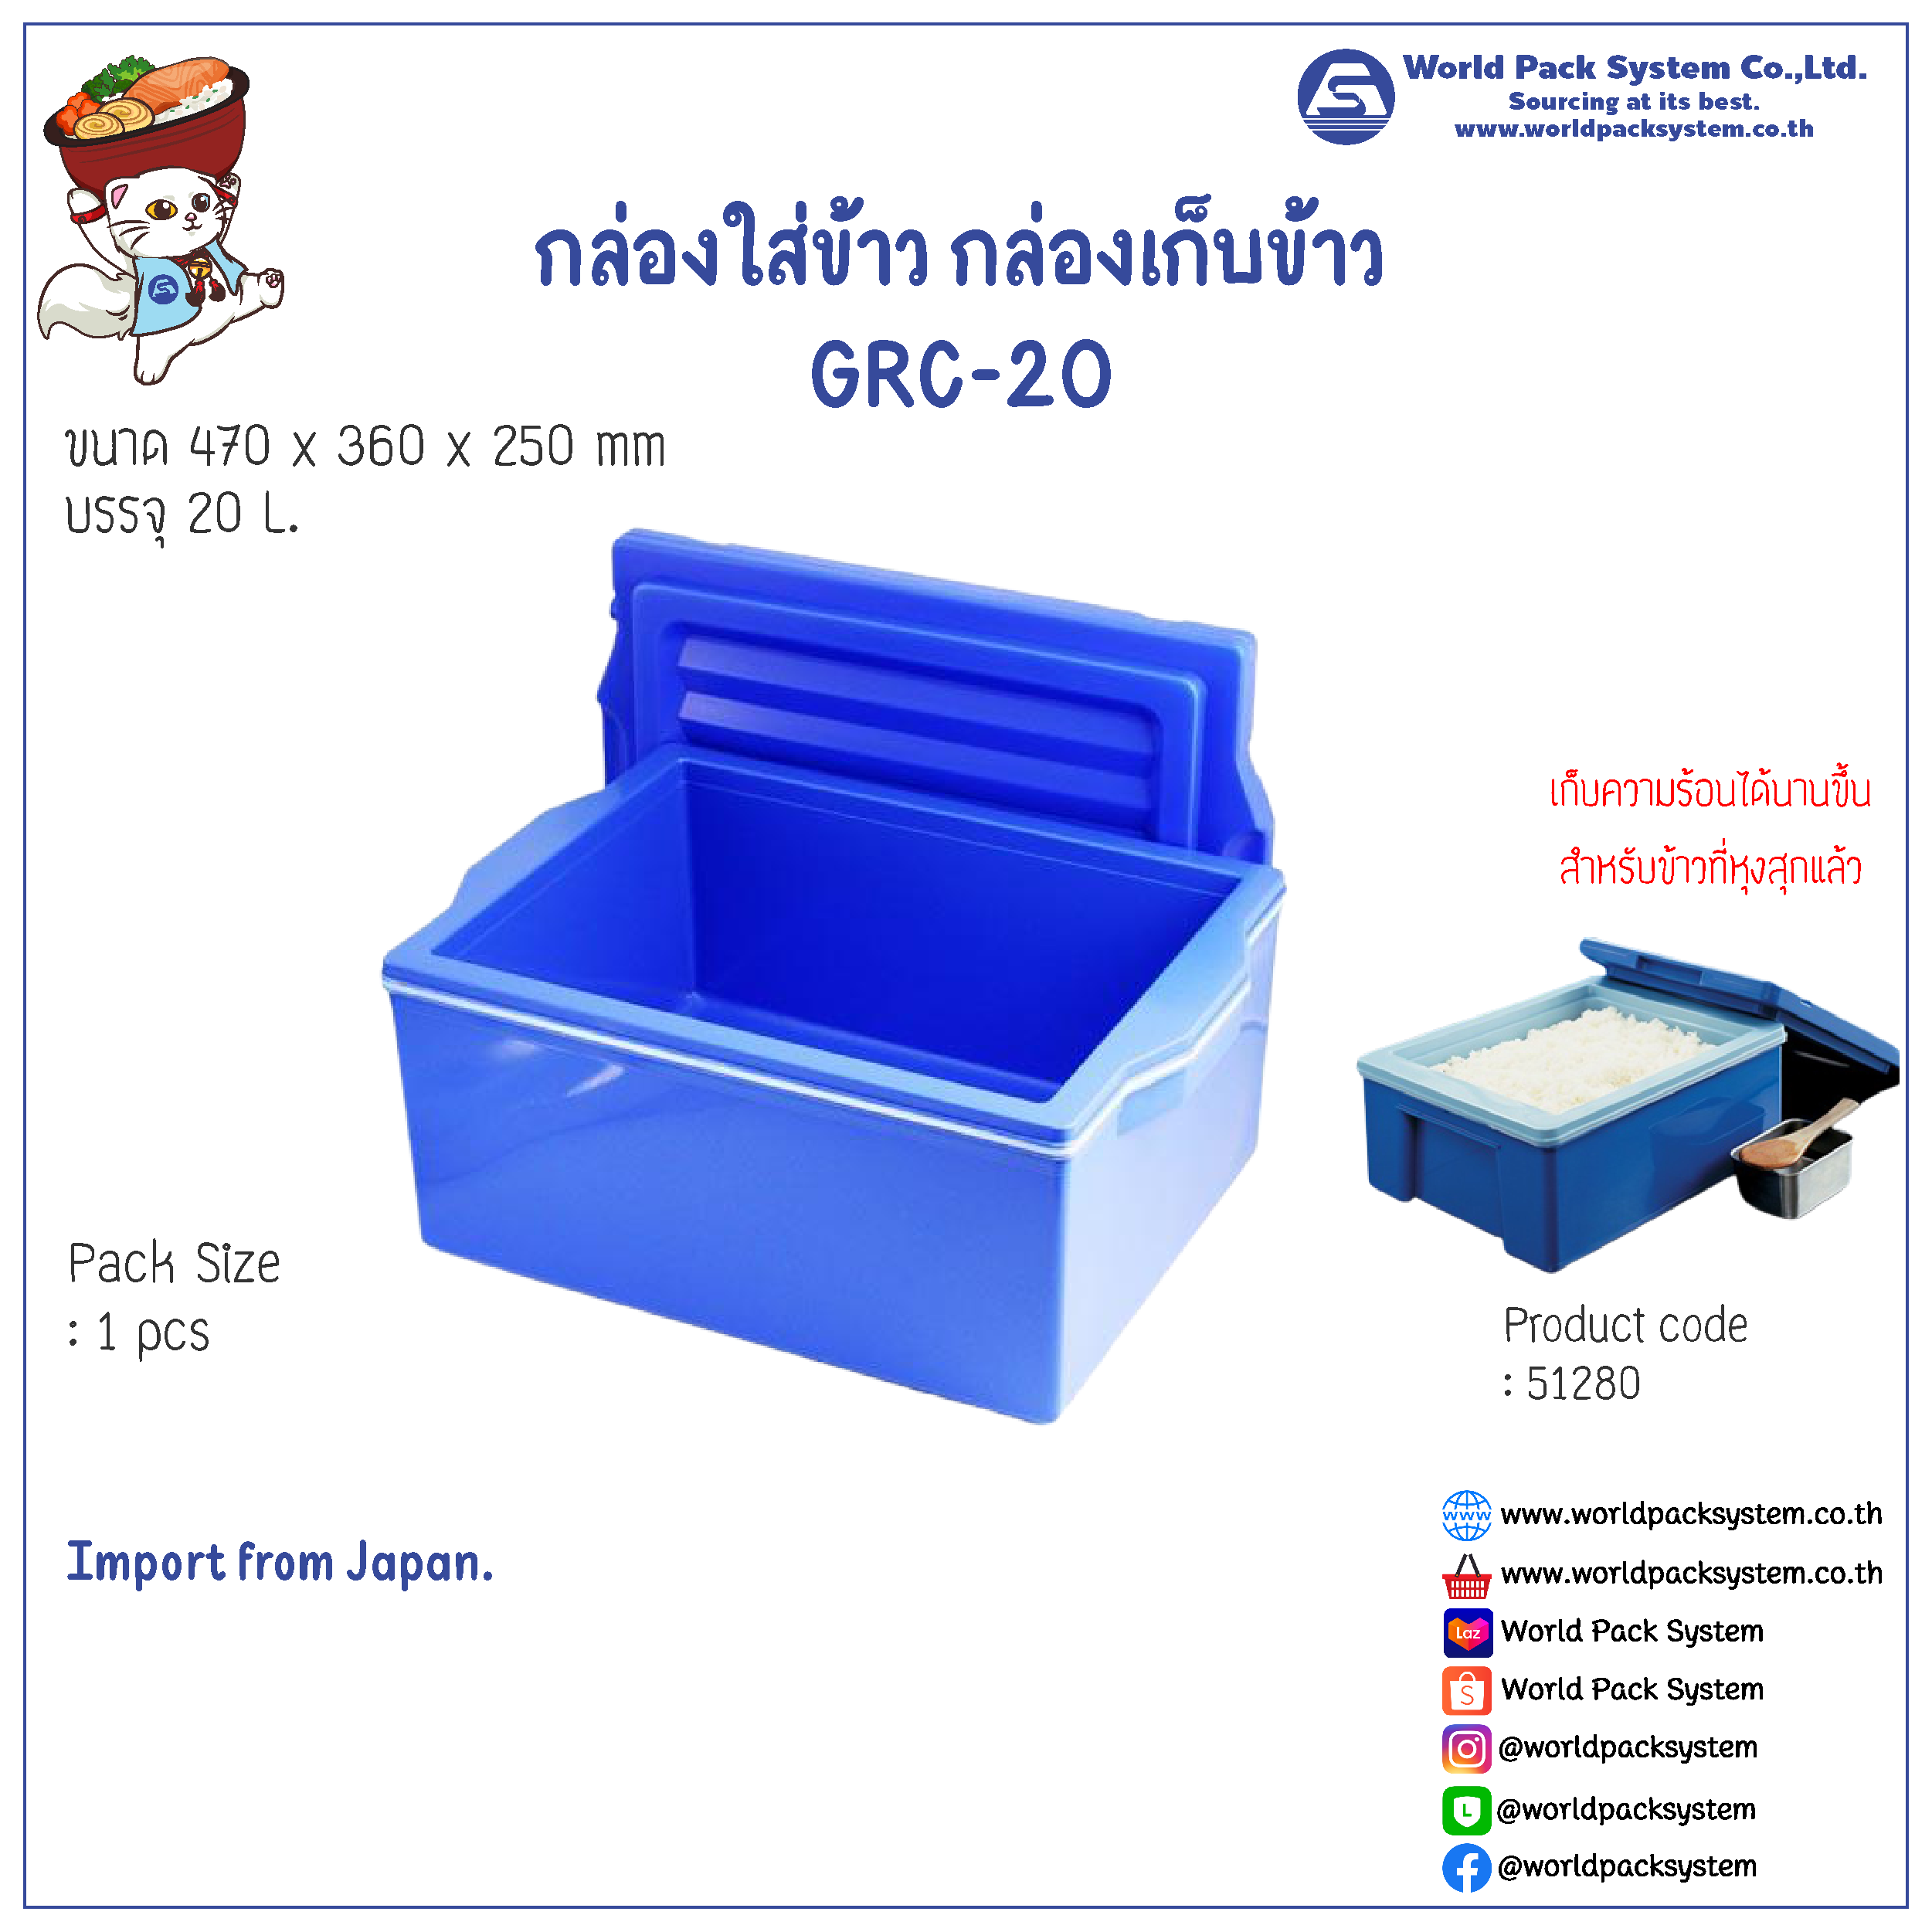 GRC - 20 Sushi Rice Insulated Container 20 L.